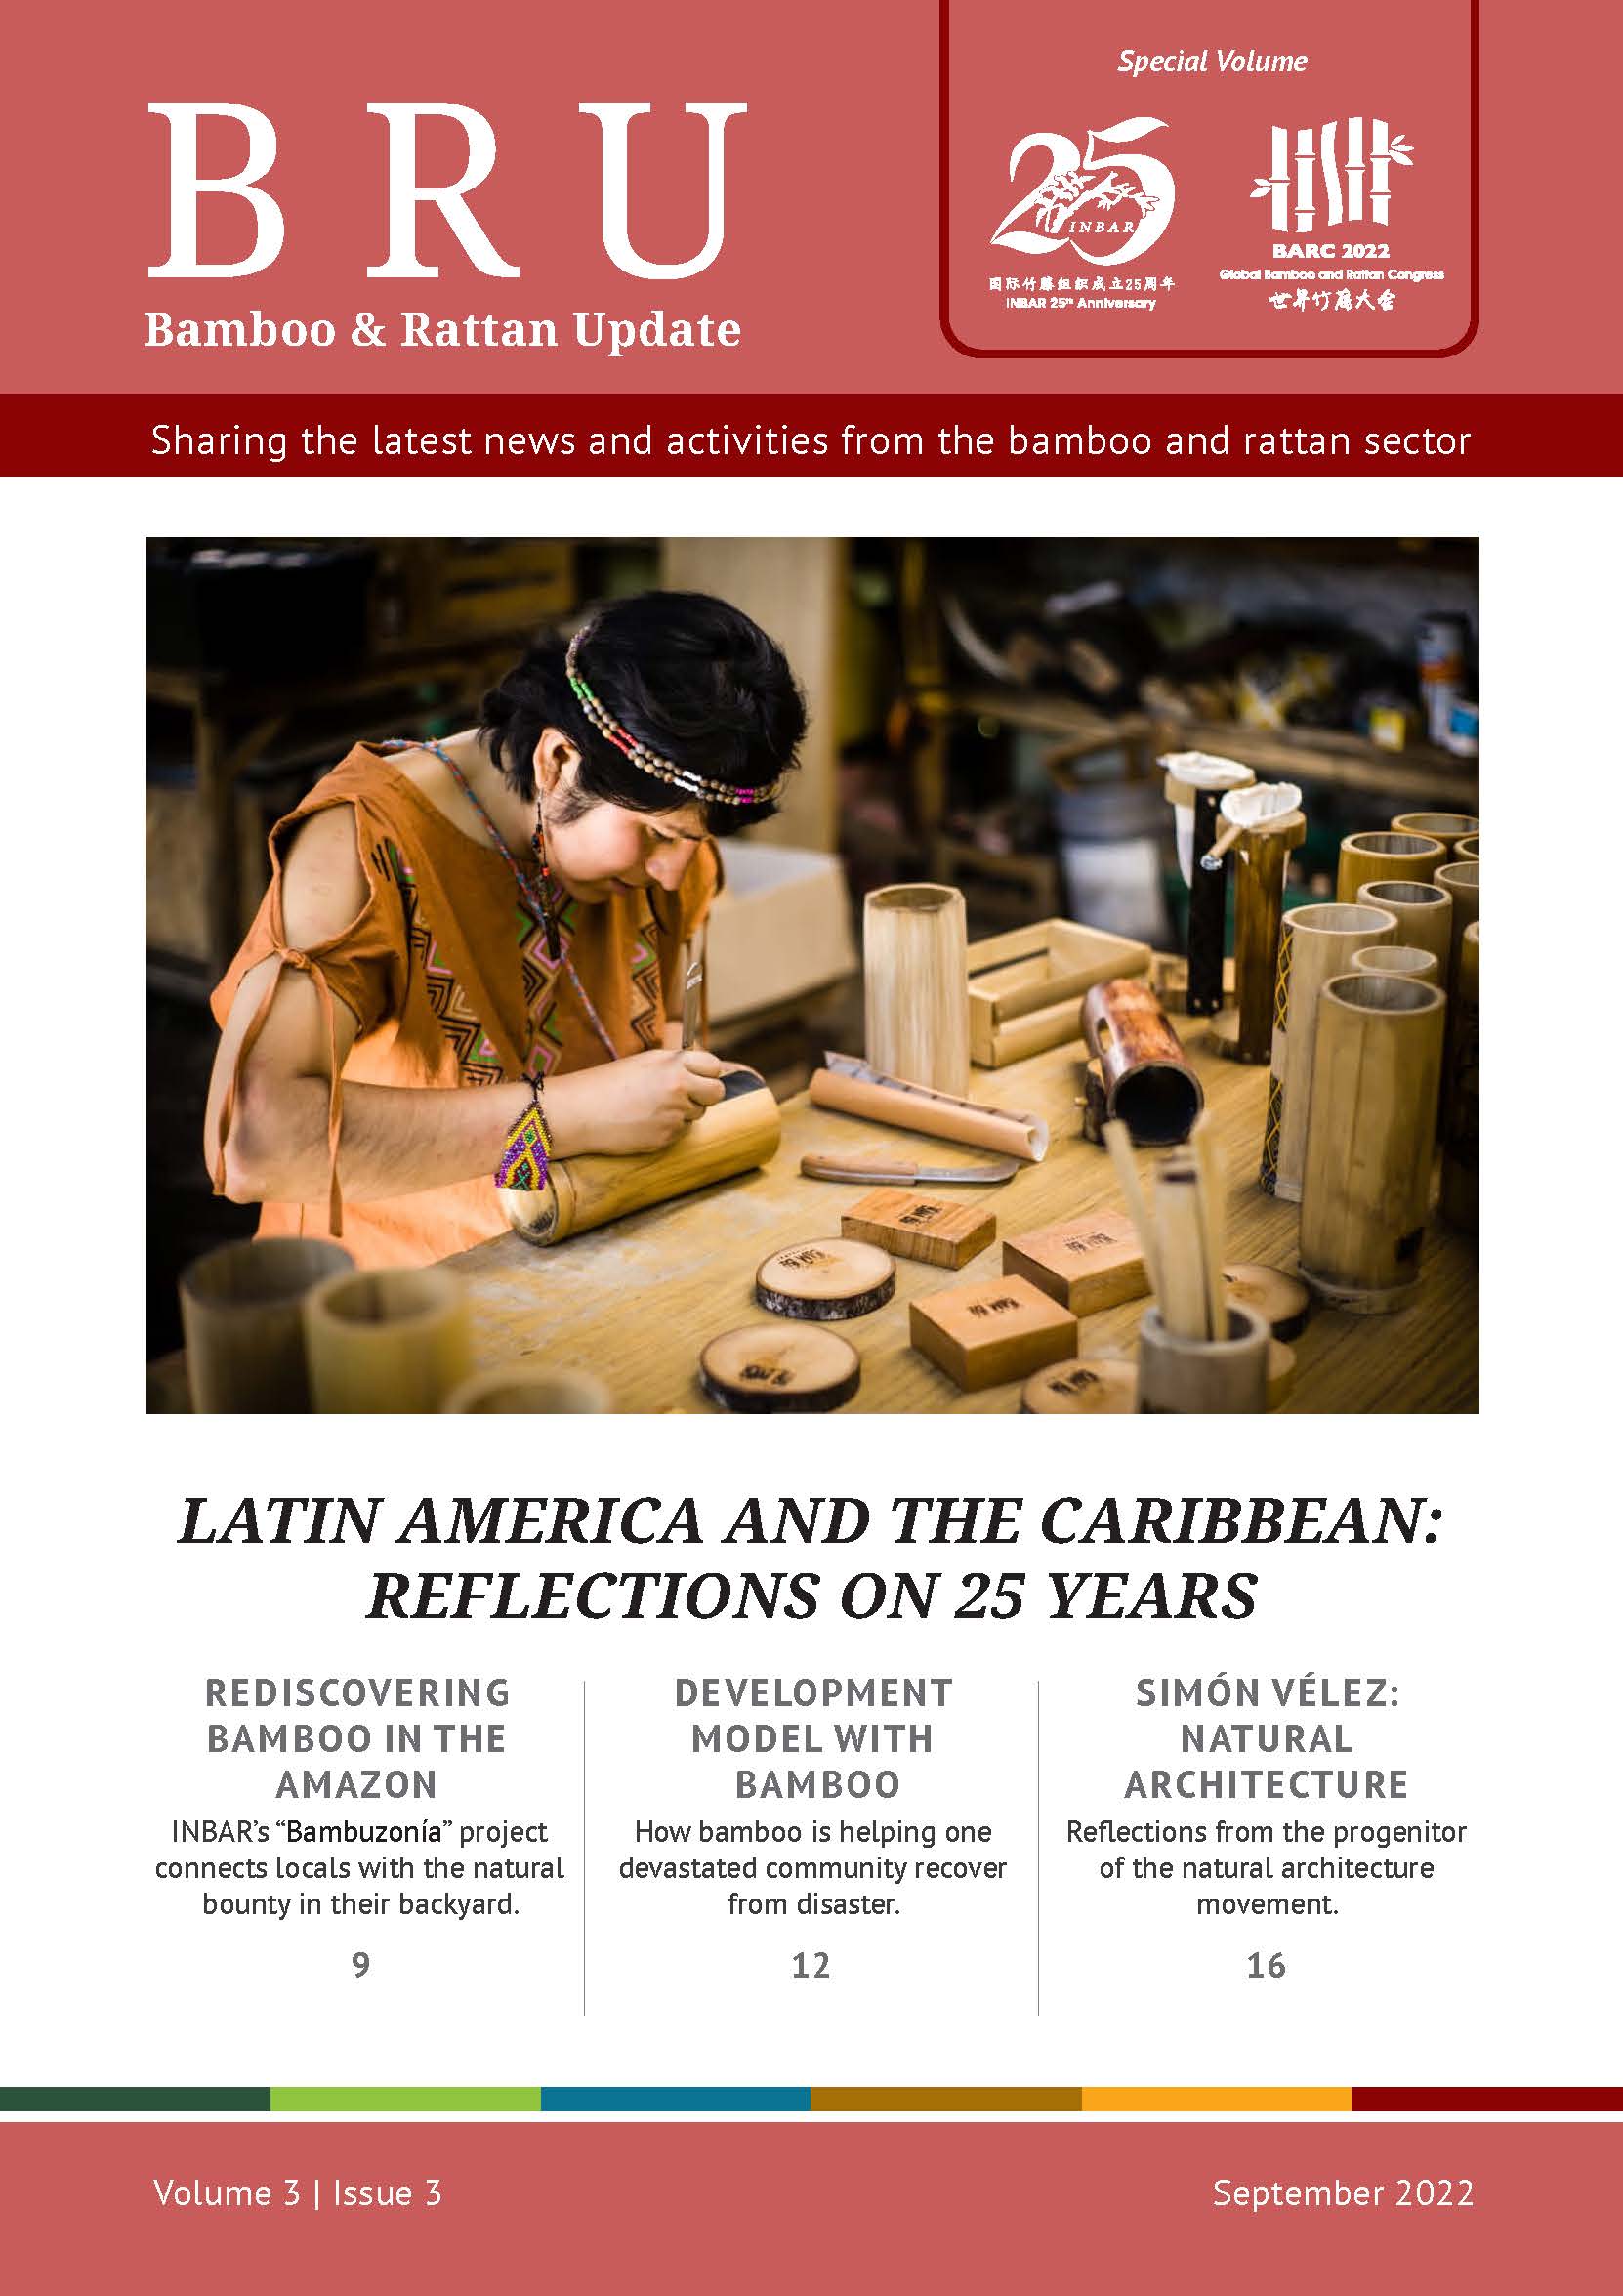 Latin America and the Caribbean: Reflections on 25 Years: Bamboo and Rattan Update – Volume 3 Issue 3